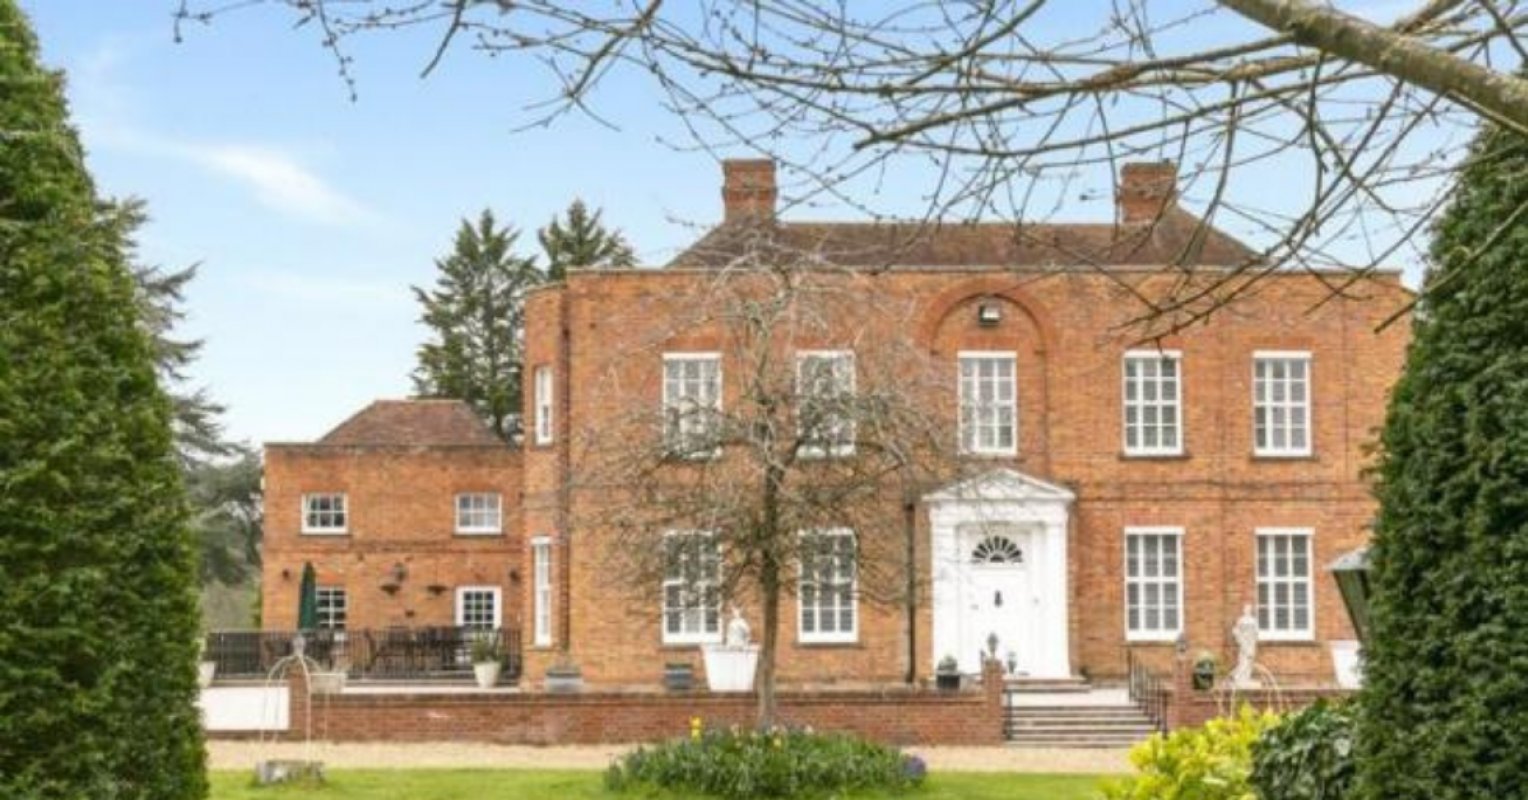 Take a look at the most expensive home to buy in Reading